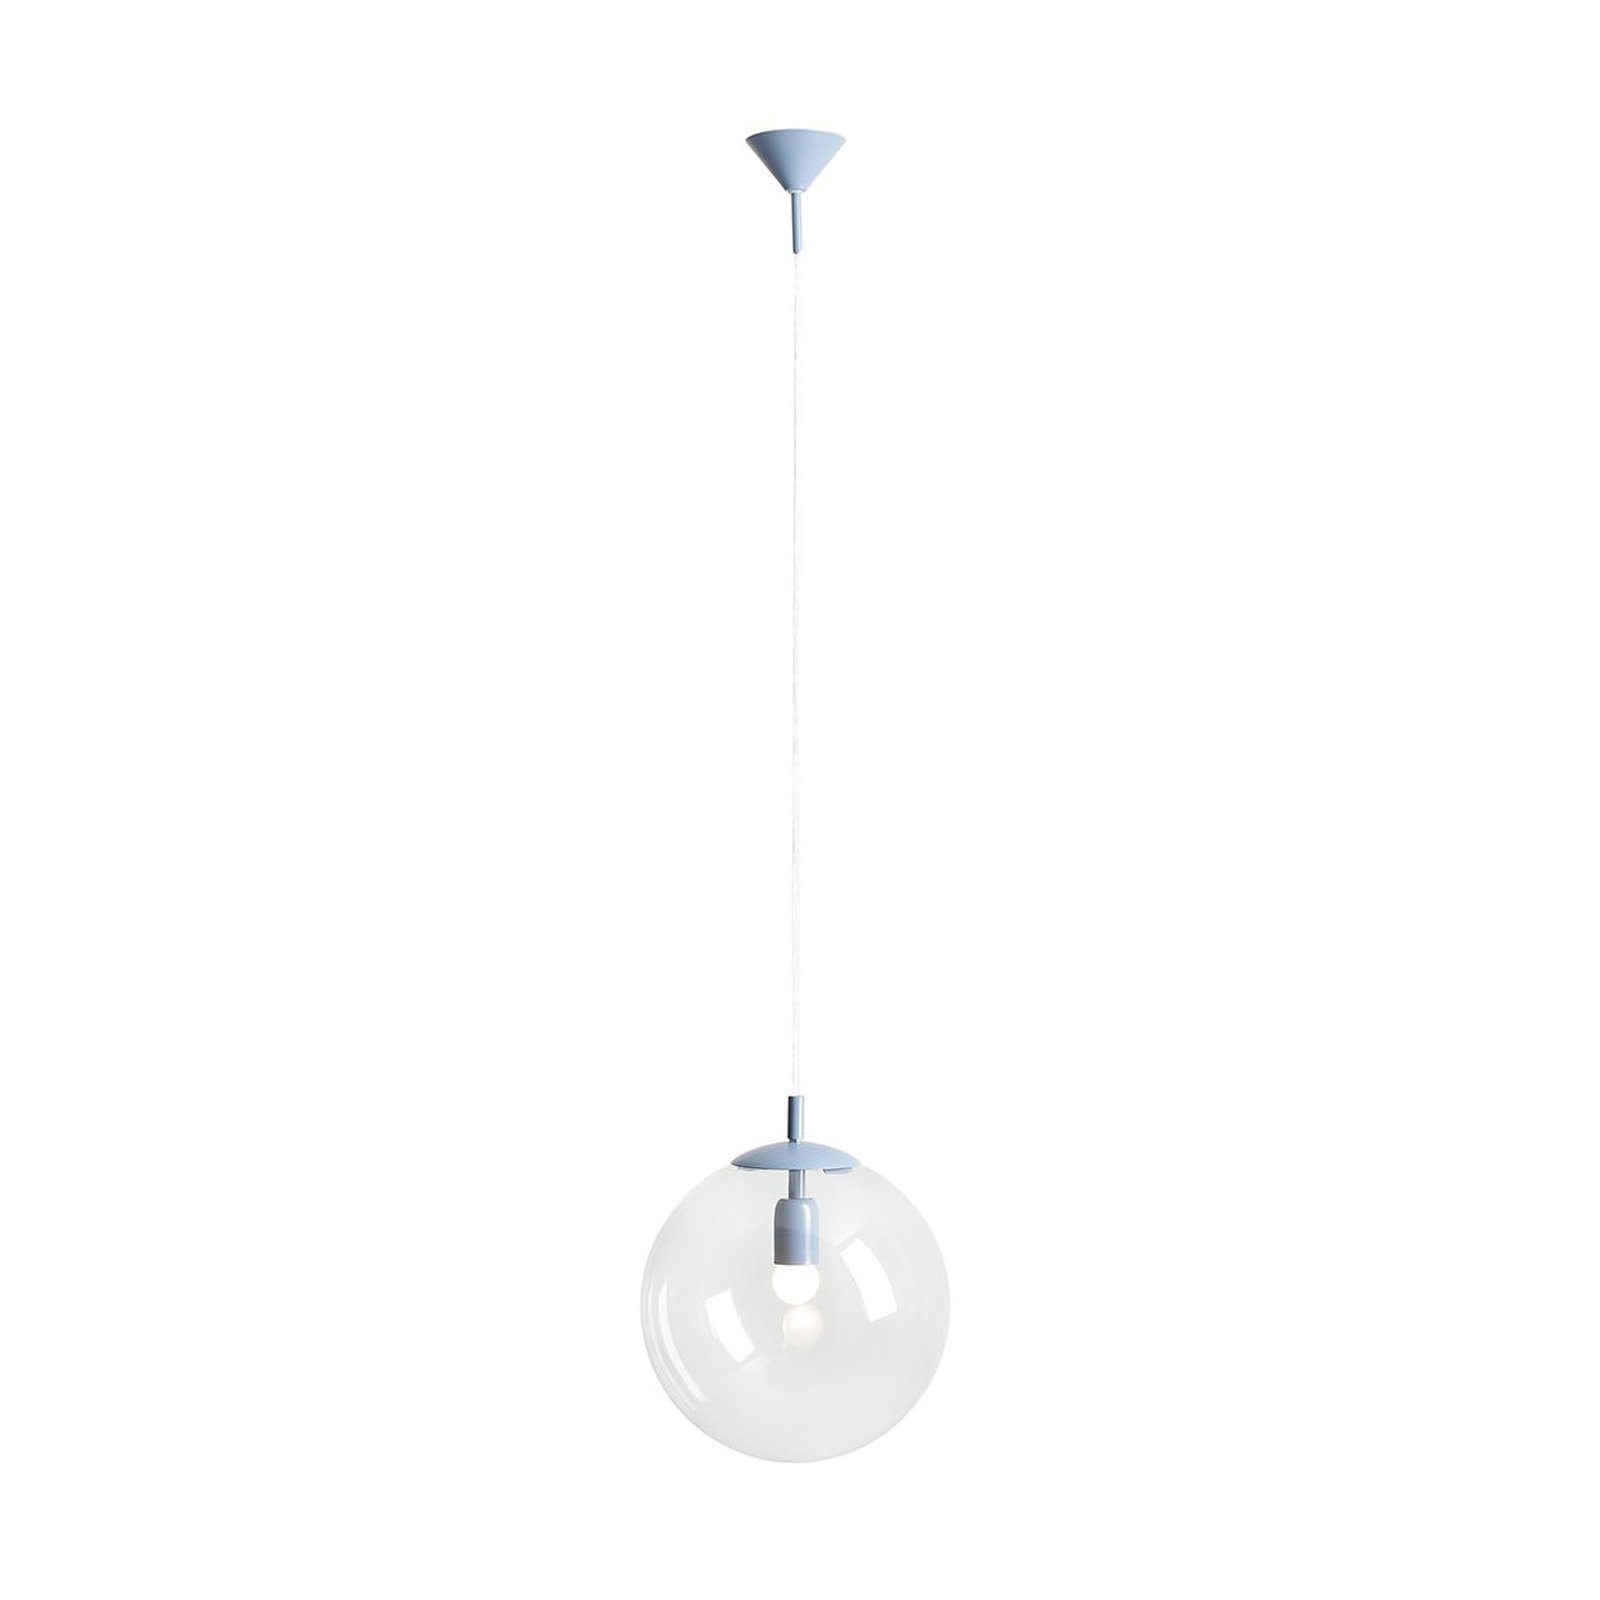 Nohr pendant light, glass lampshade, blue/clear